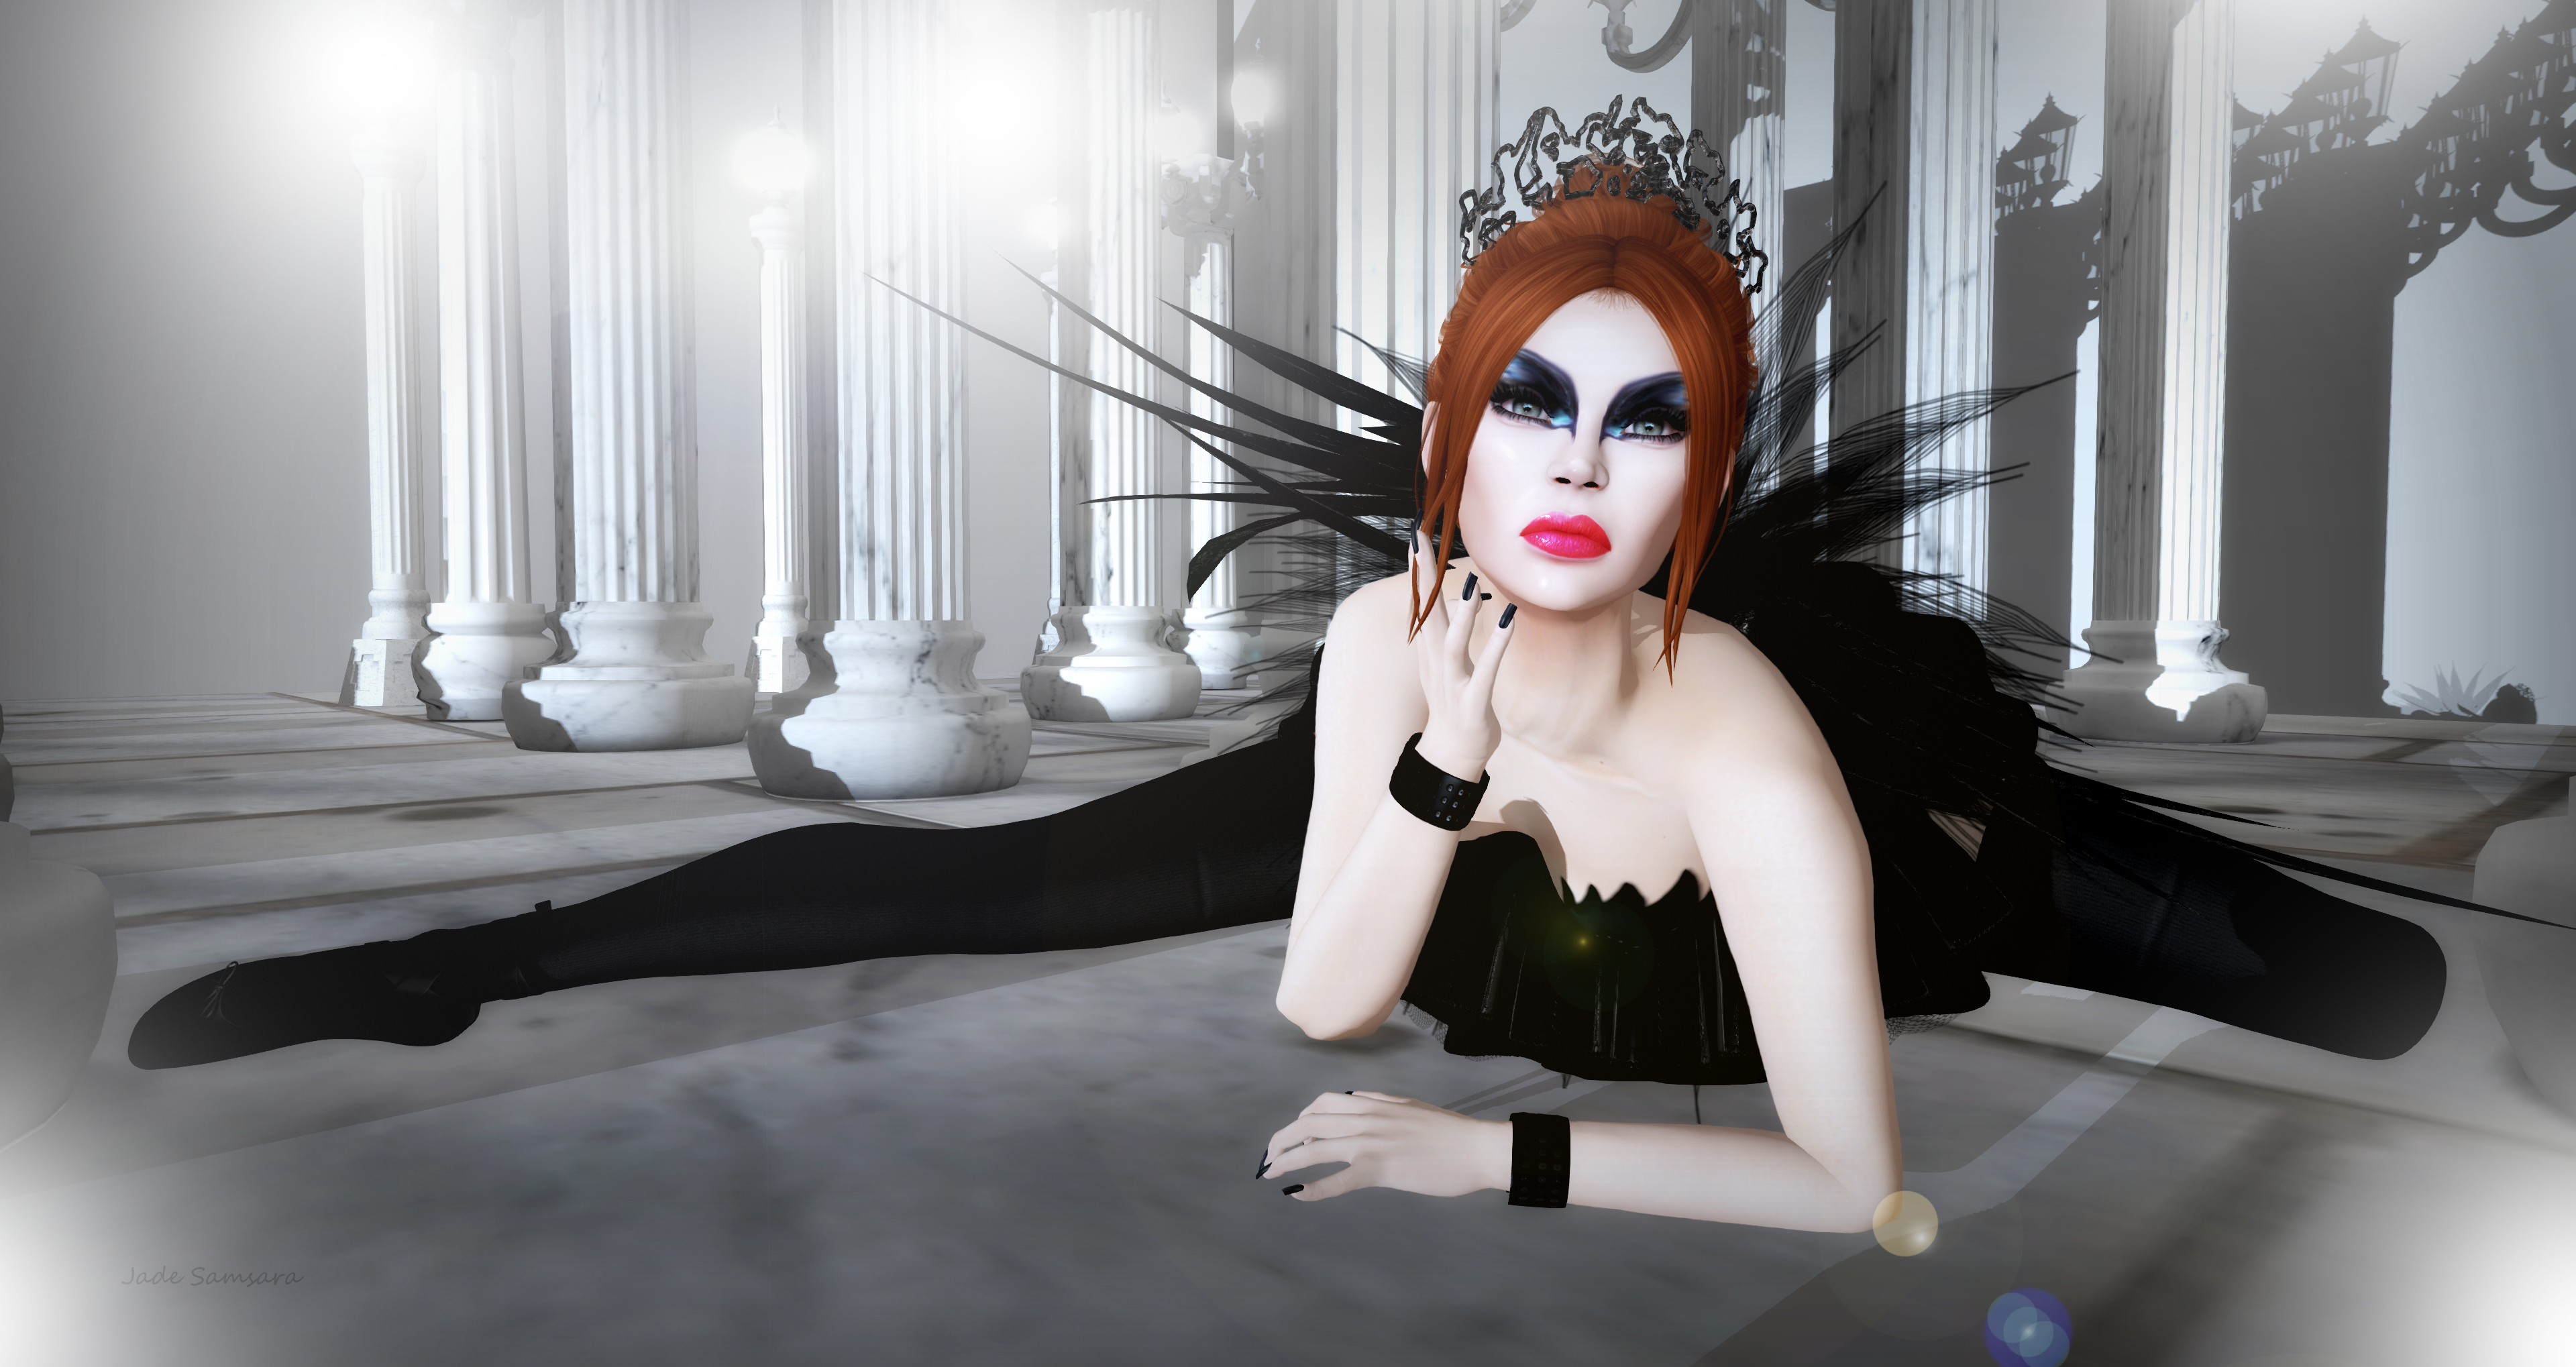 The Black Swan's Song - Featuring Petit Chat, Virtual Diva and Truth